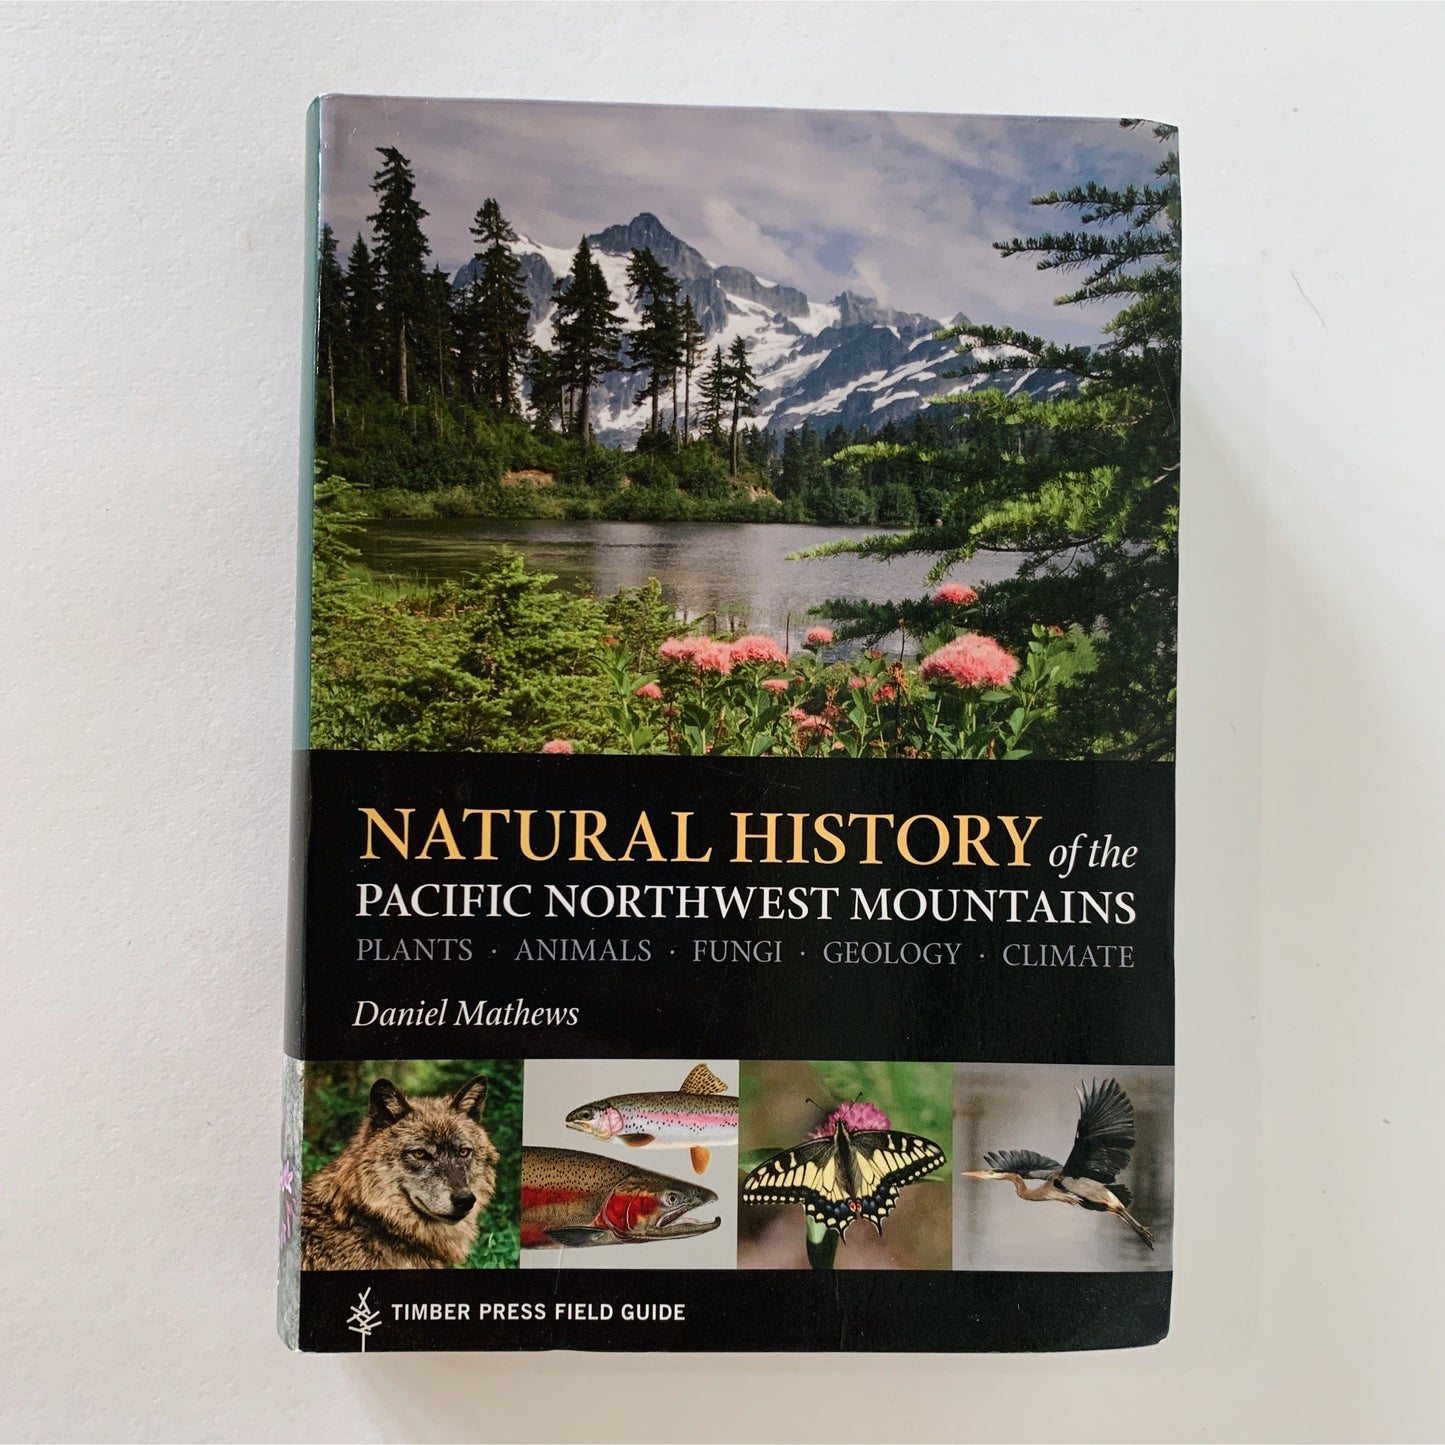 Natural History of the Pacific Northwest Mountains, Daniel Mathews, 2017